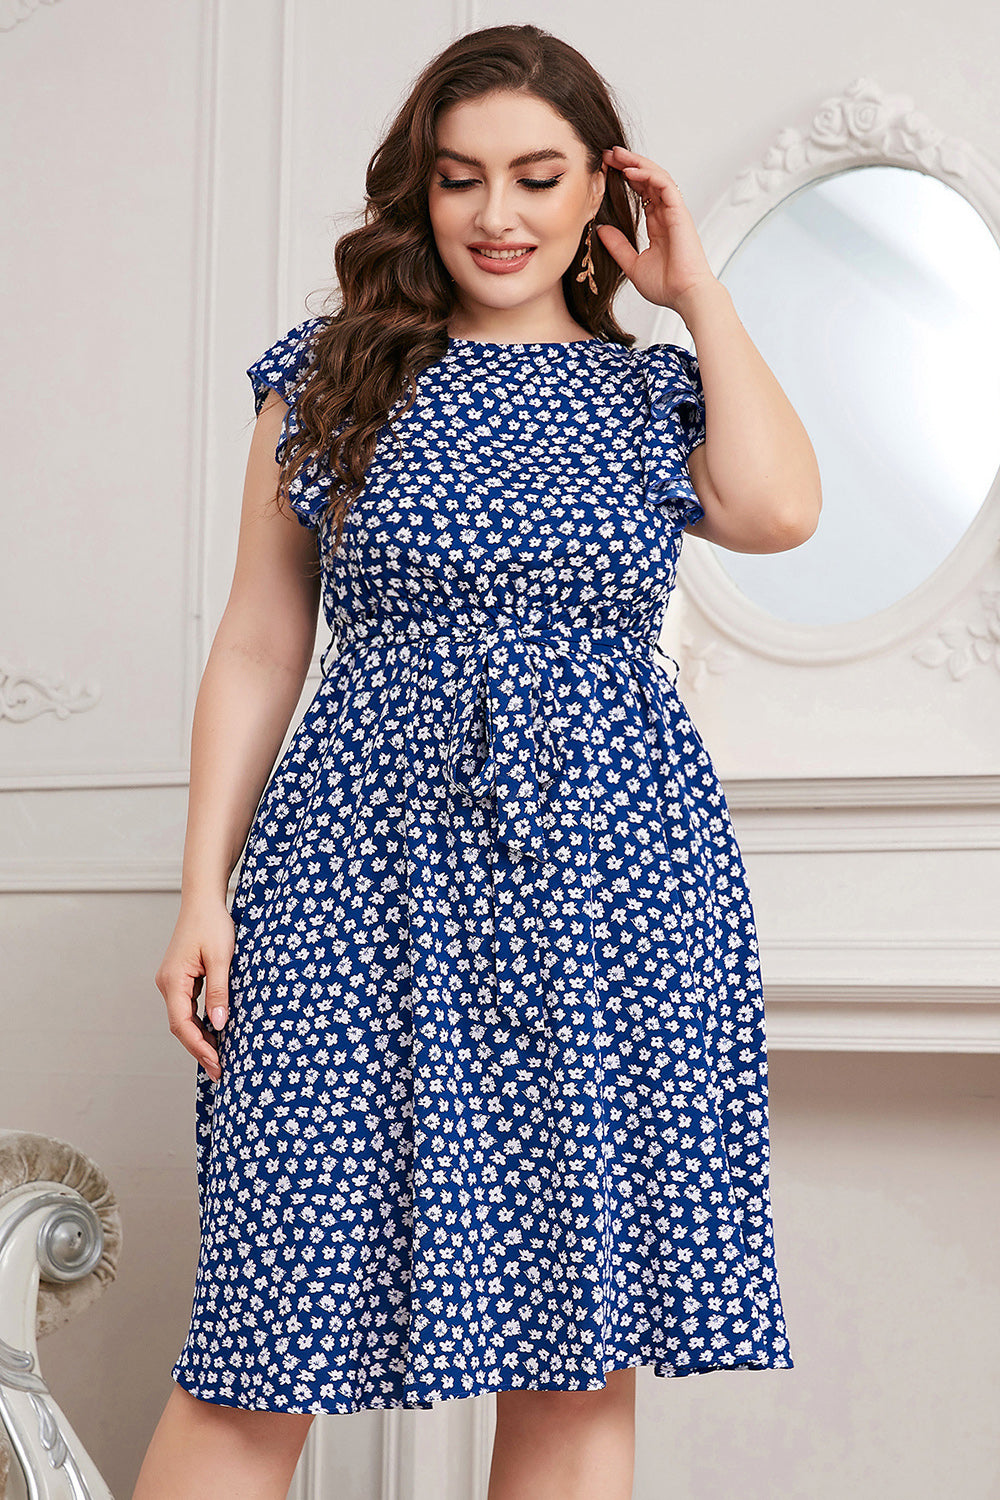 Blue Printed A Line Plus Size Summer Dress With Ruffles